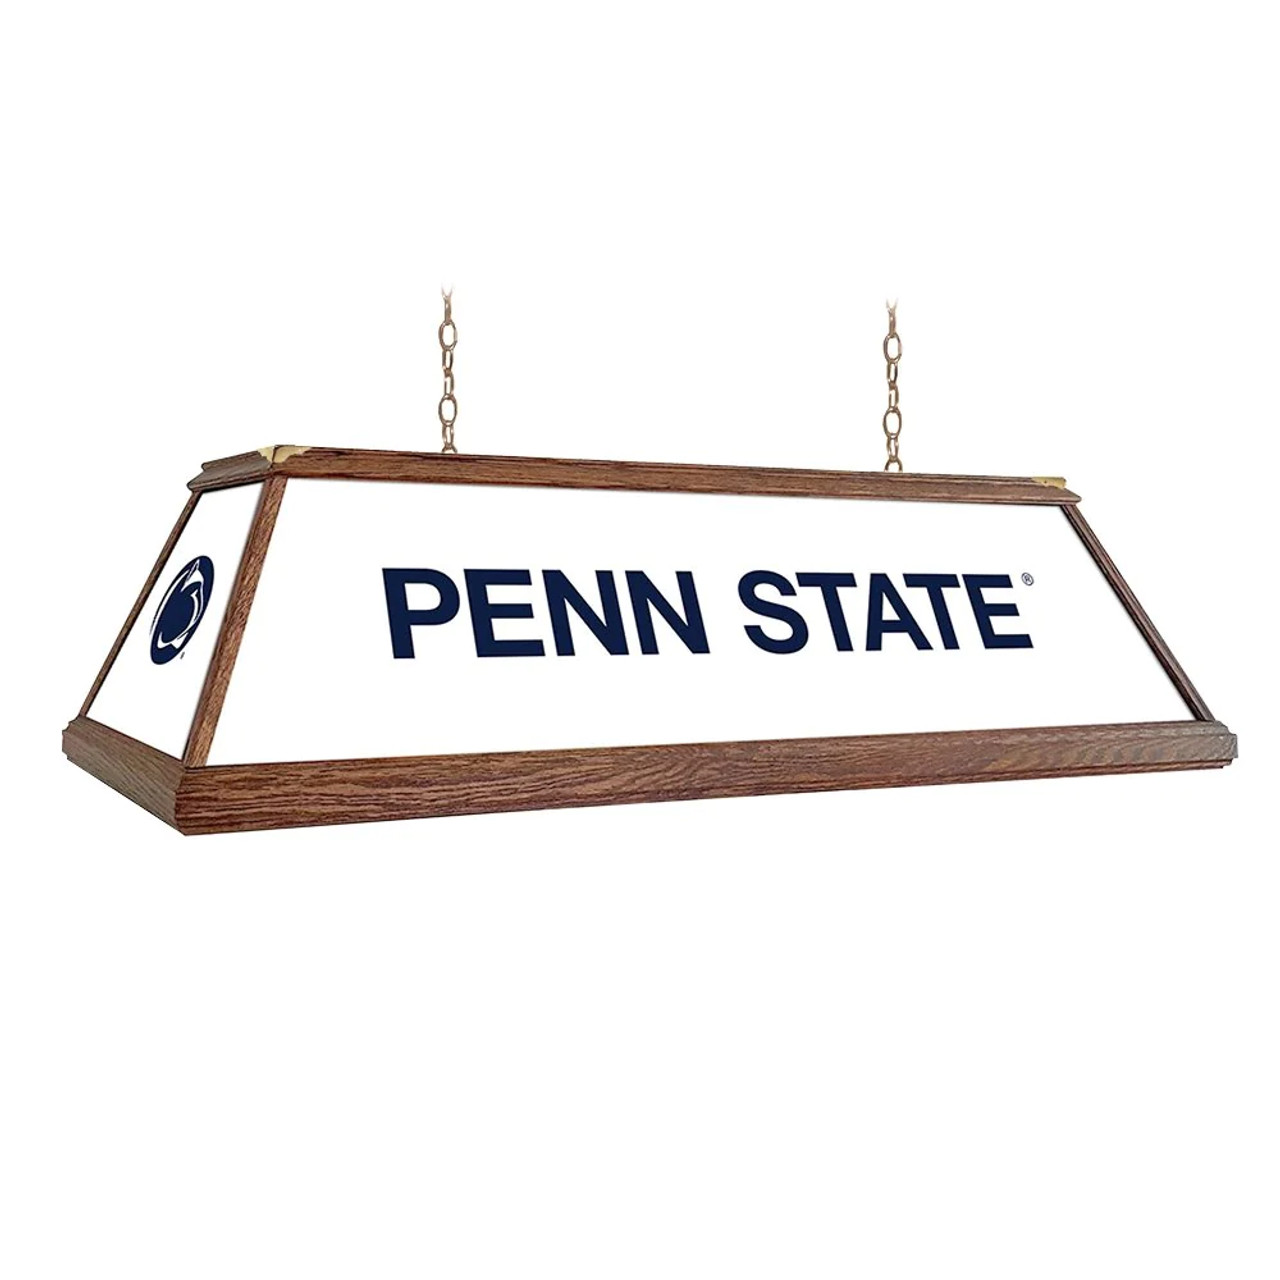 Penn State, PSU, Nittany, Lions, Premium, Wood, Billiard, Pool, Table, Light, Lamp, NCPNST-330-01A, NCPNST-330-01B, The Fan-Brand, 689481024493